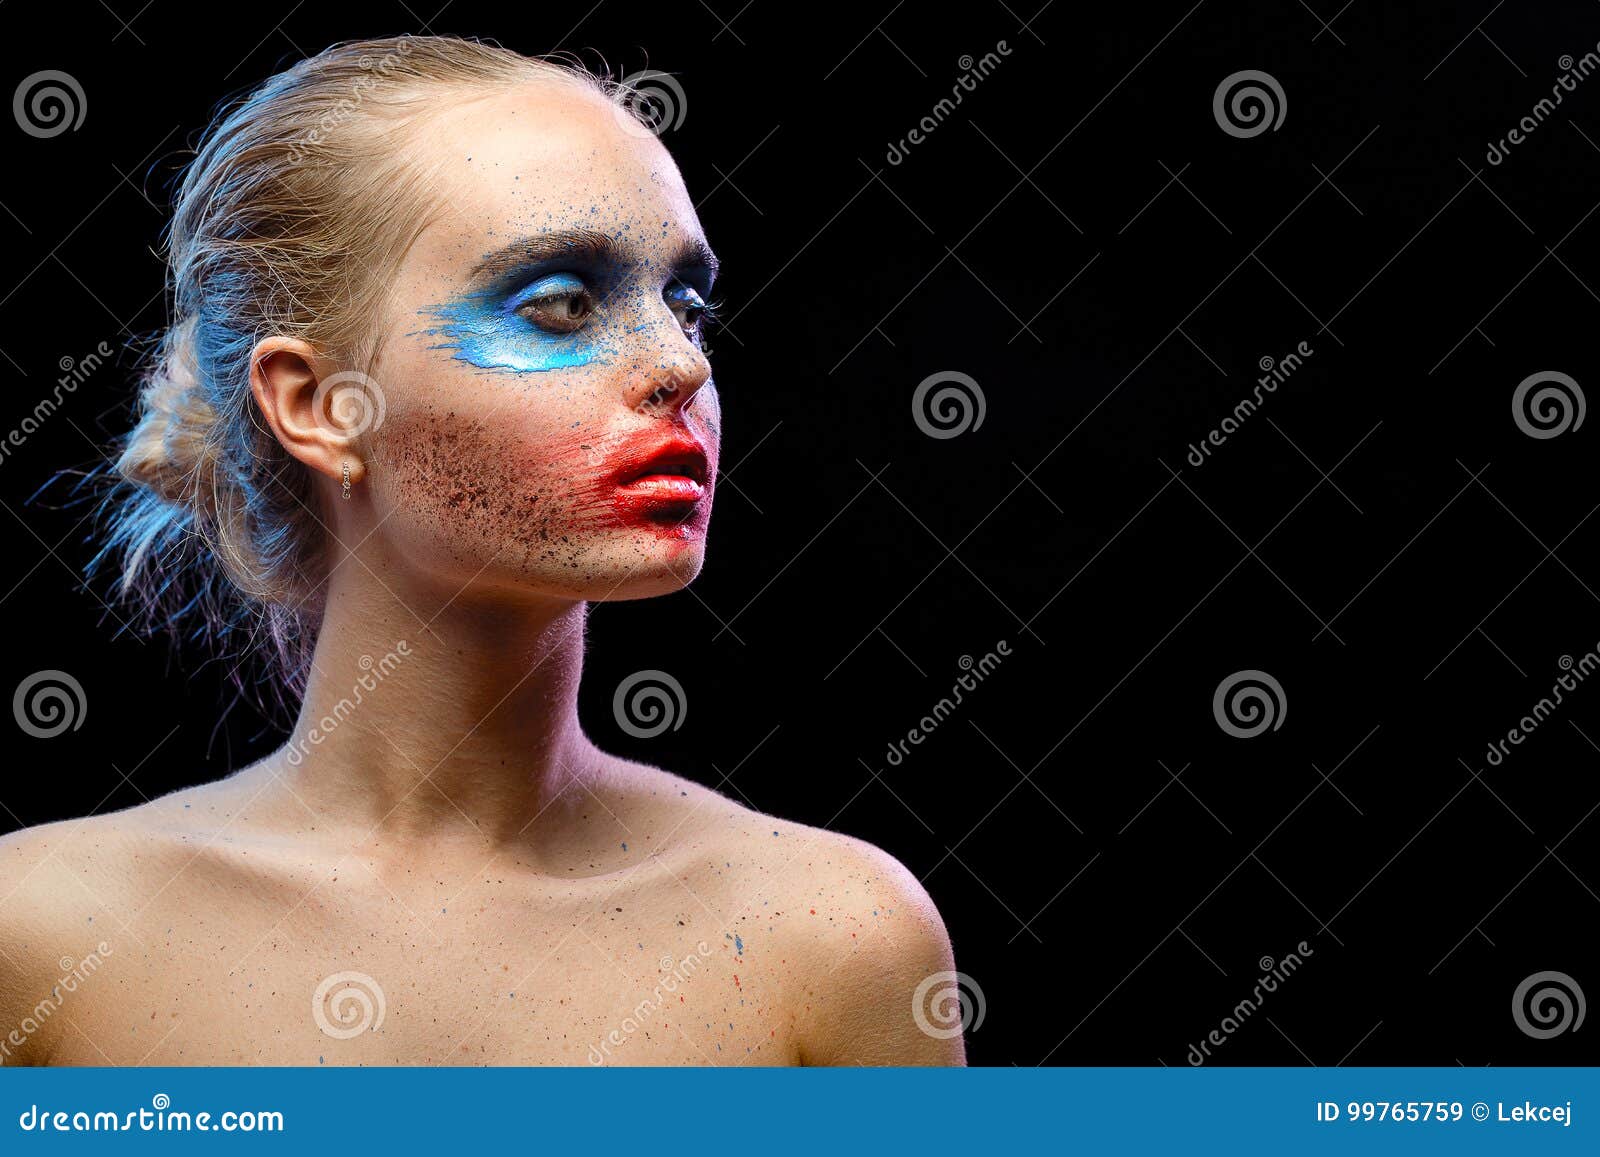 Creative Multicolored Makeup Stock Image Image Of Face Head